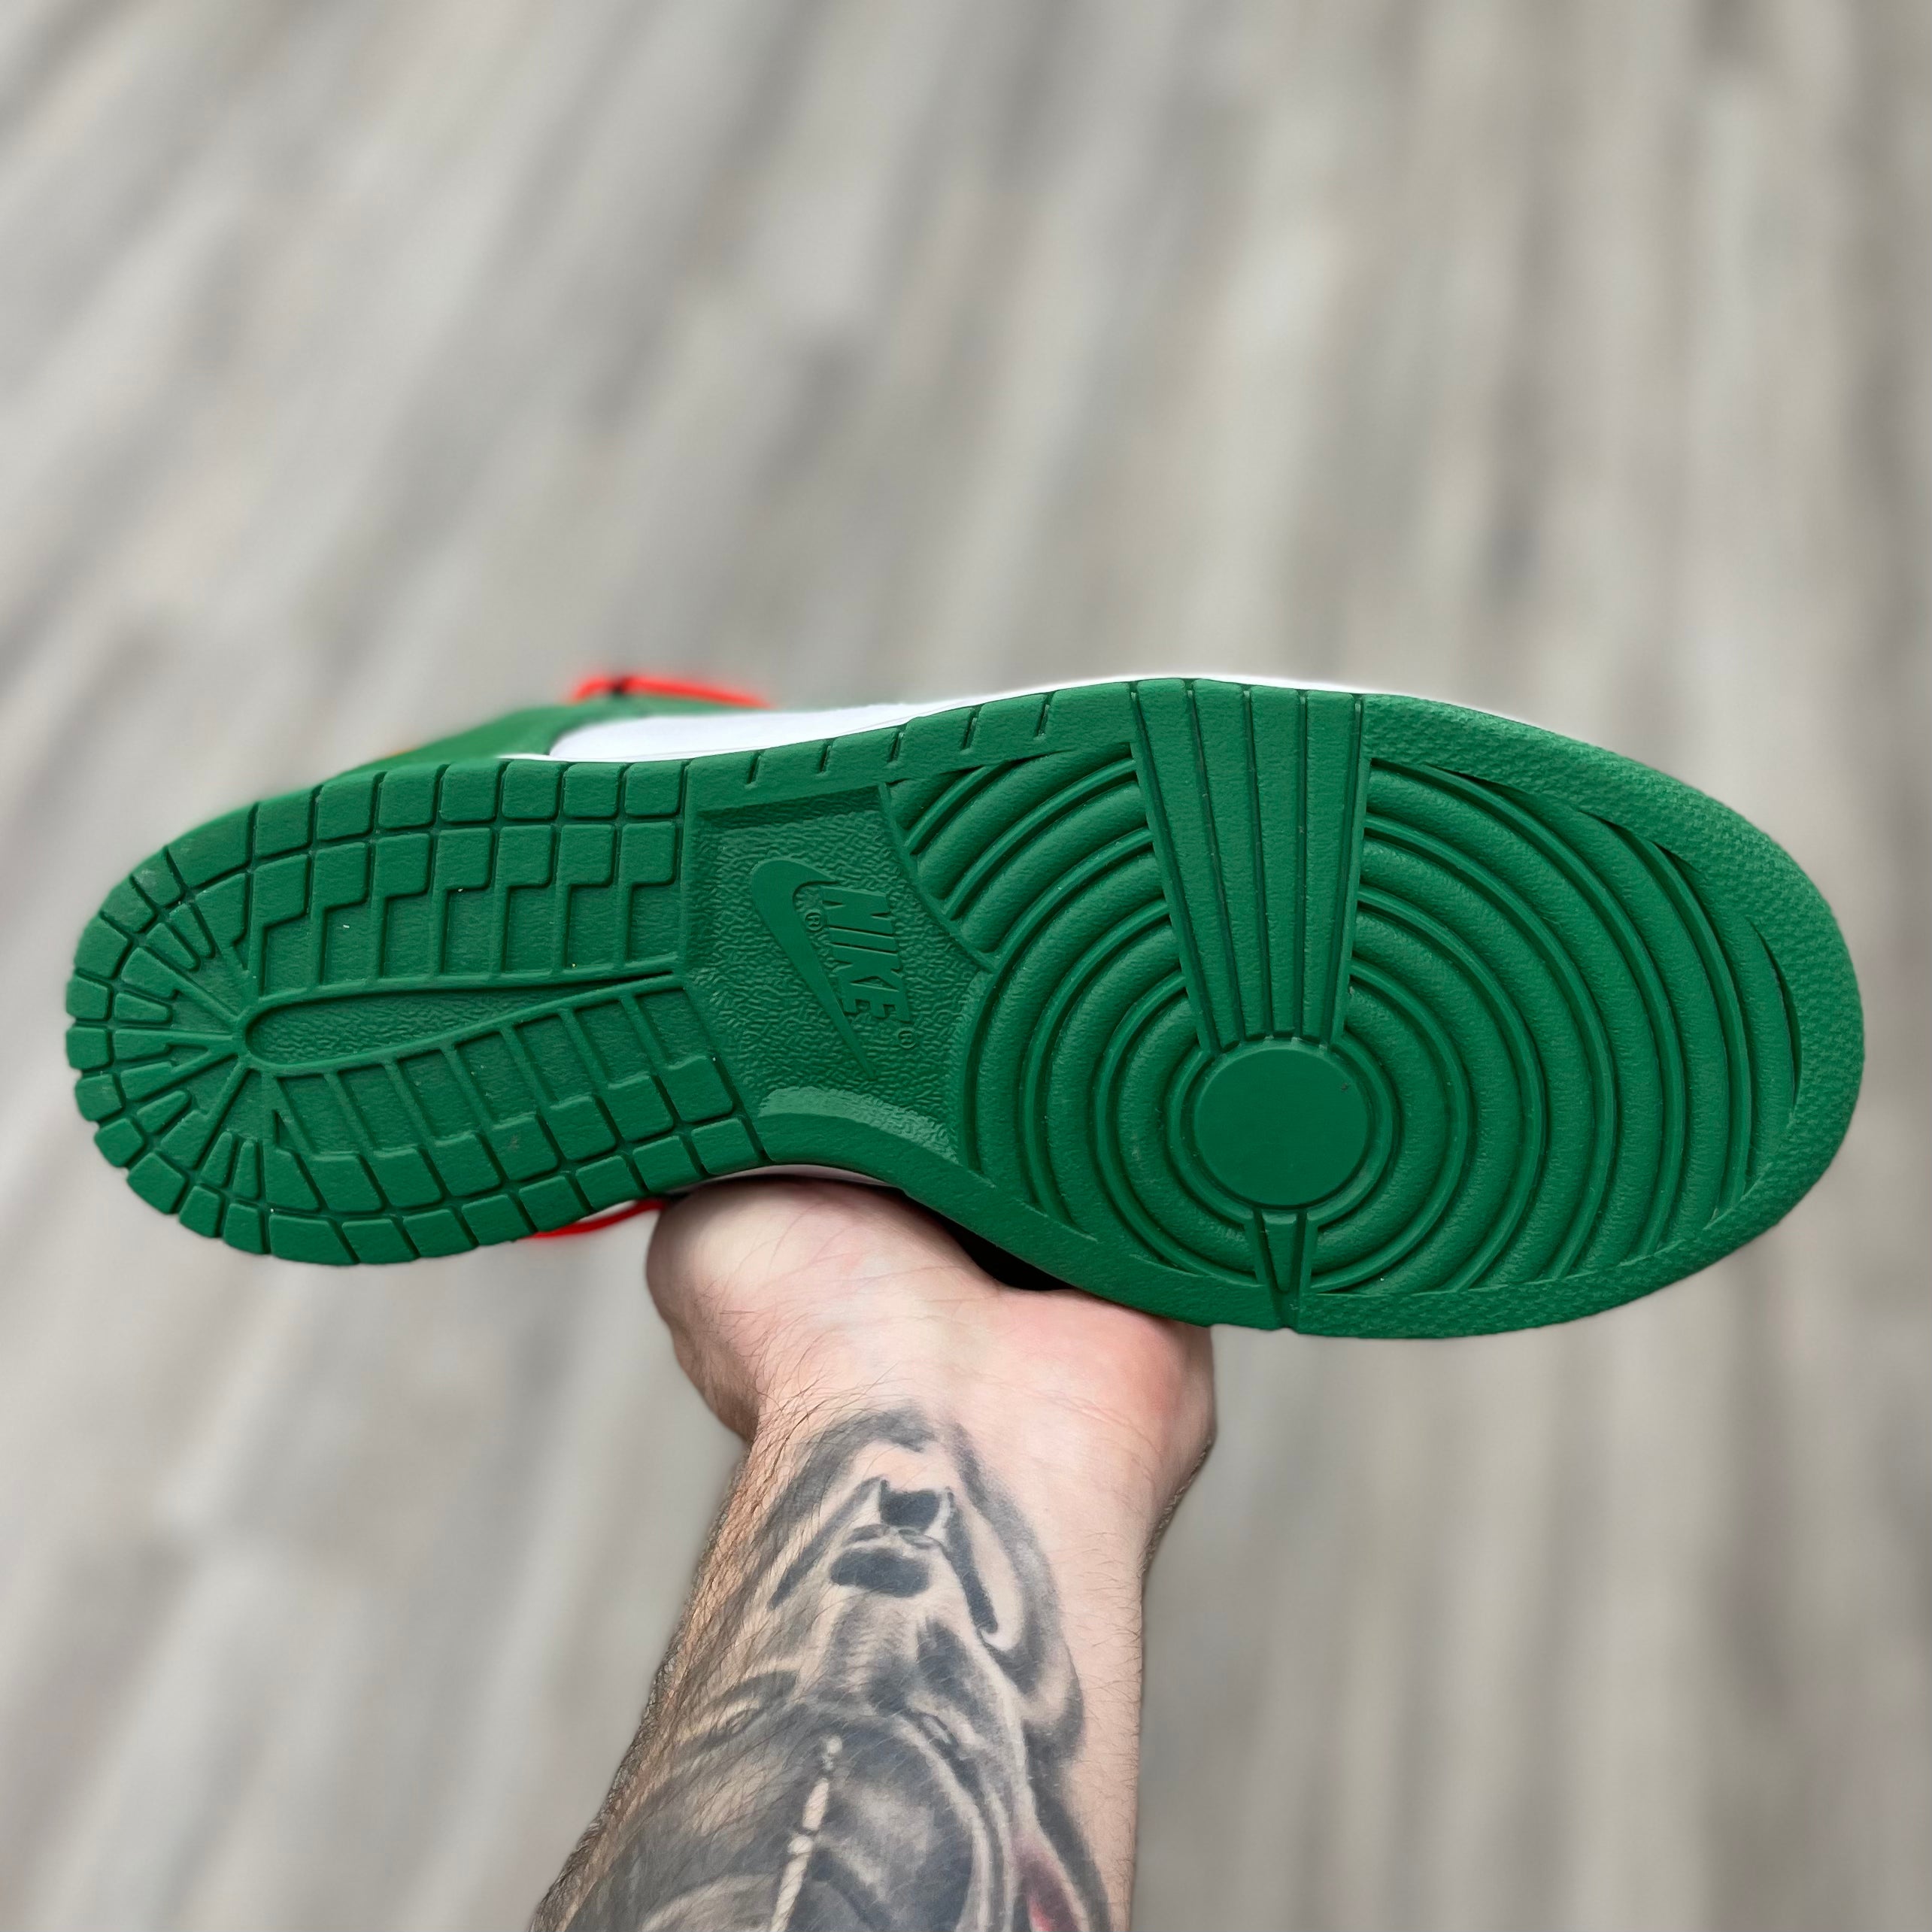 Nike Dunk Low Off White “Pine Green”